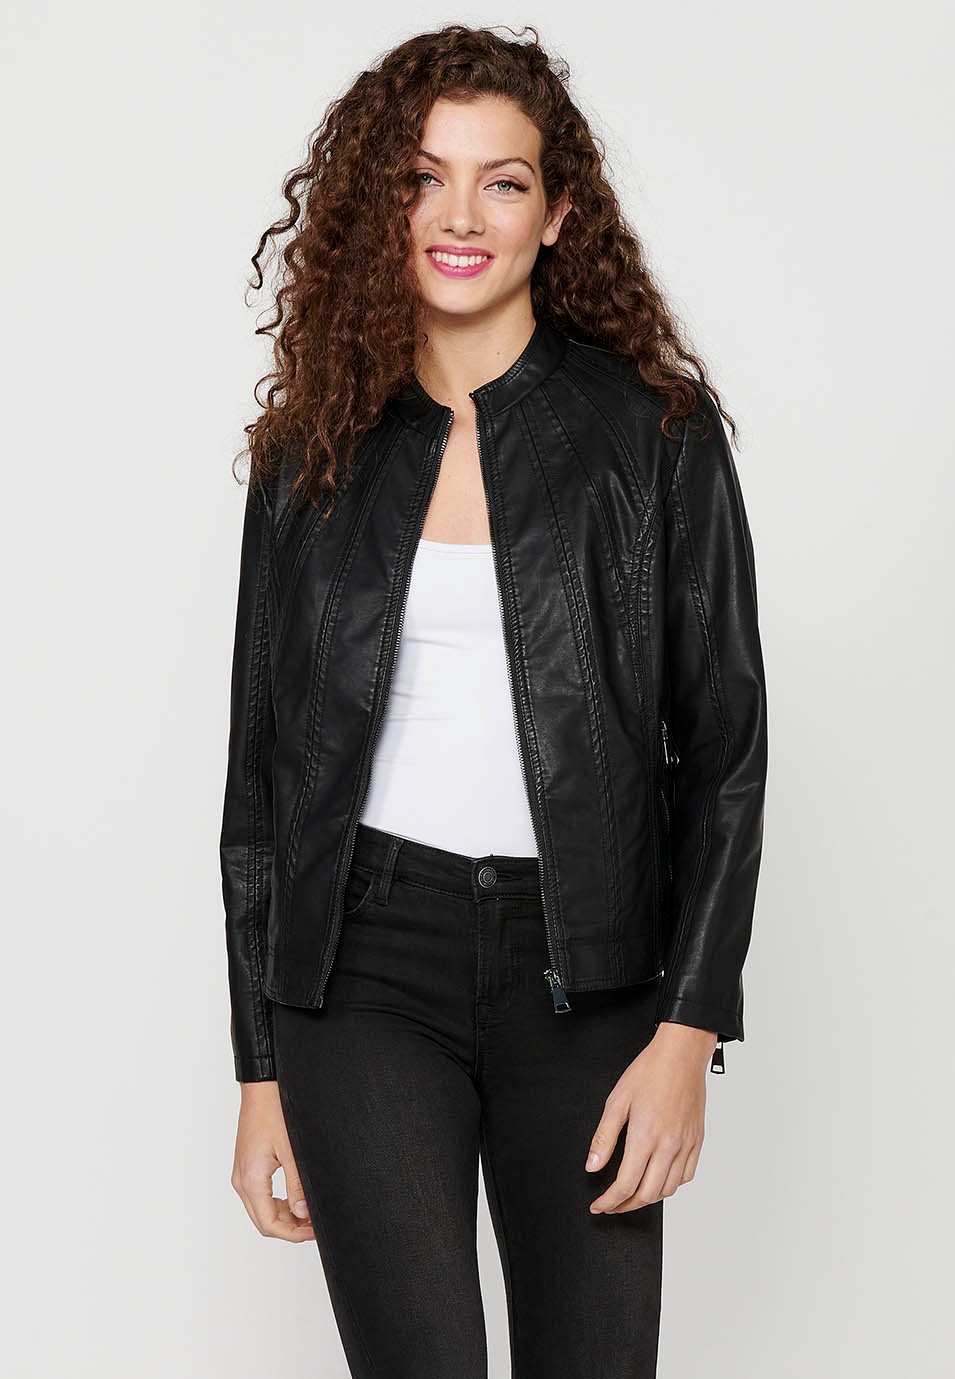 Long Sleeve Jacket with Round High Neck and Front Zipper Closure in Black for Women 5